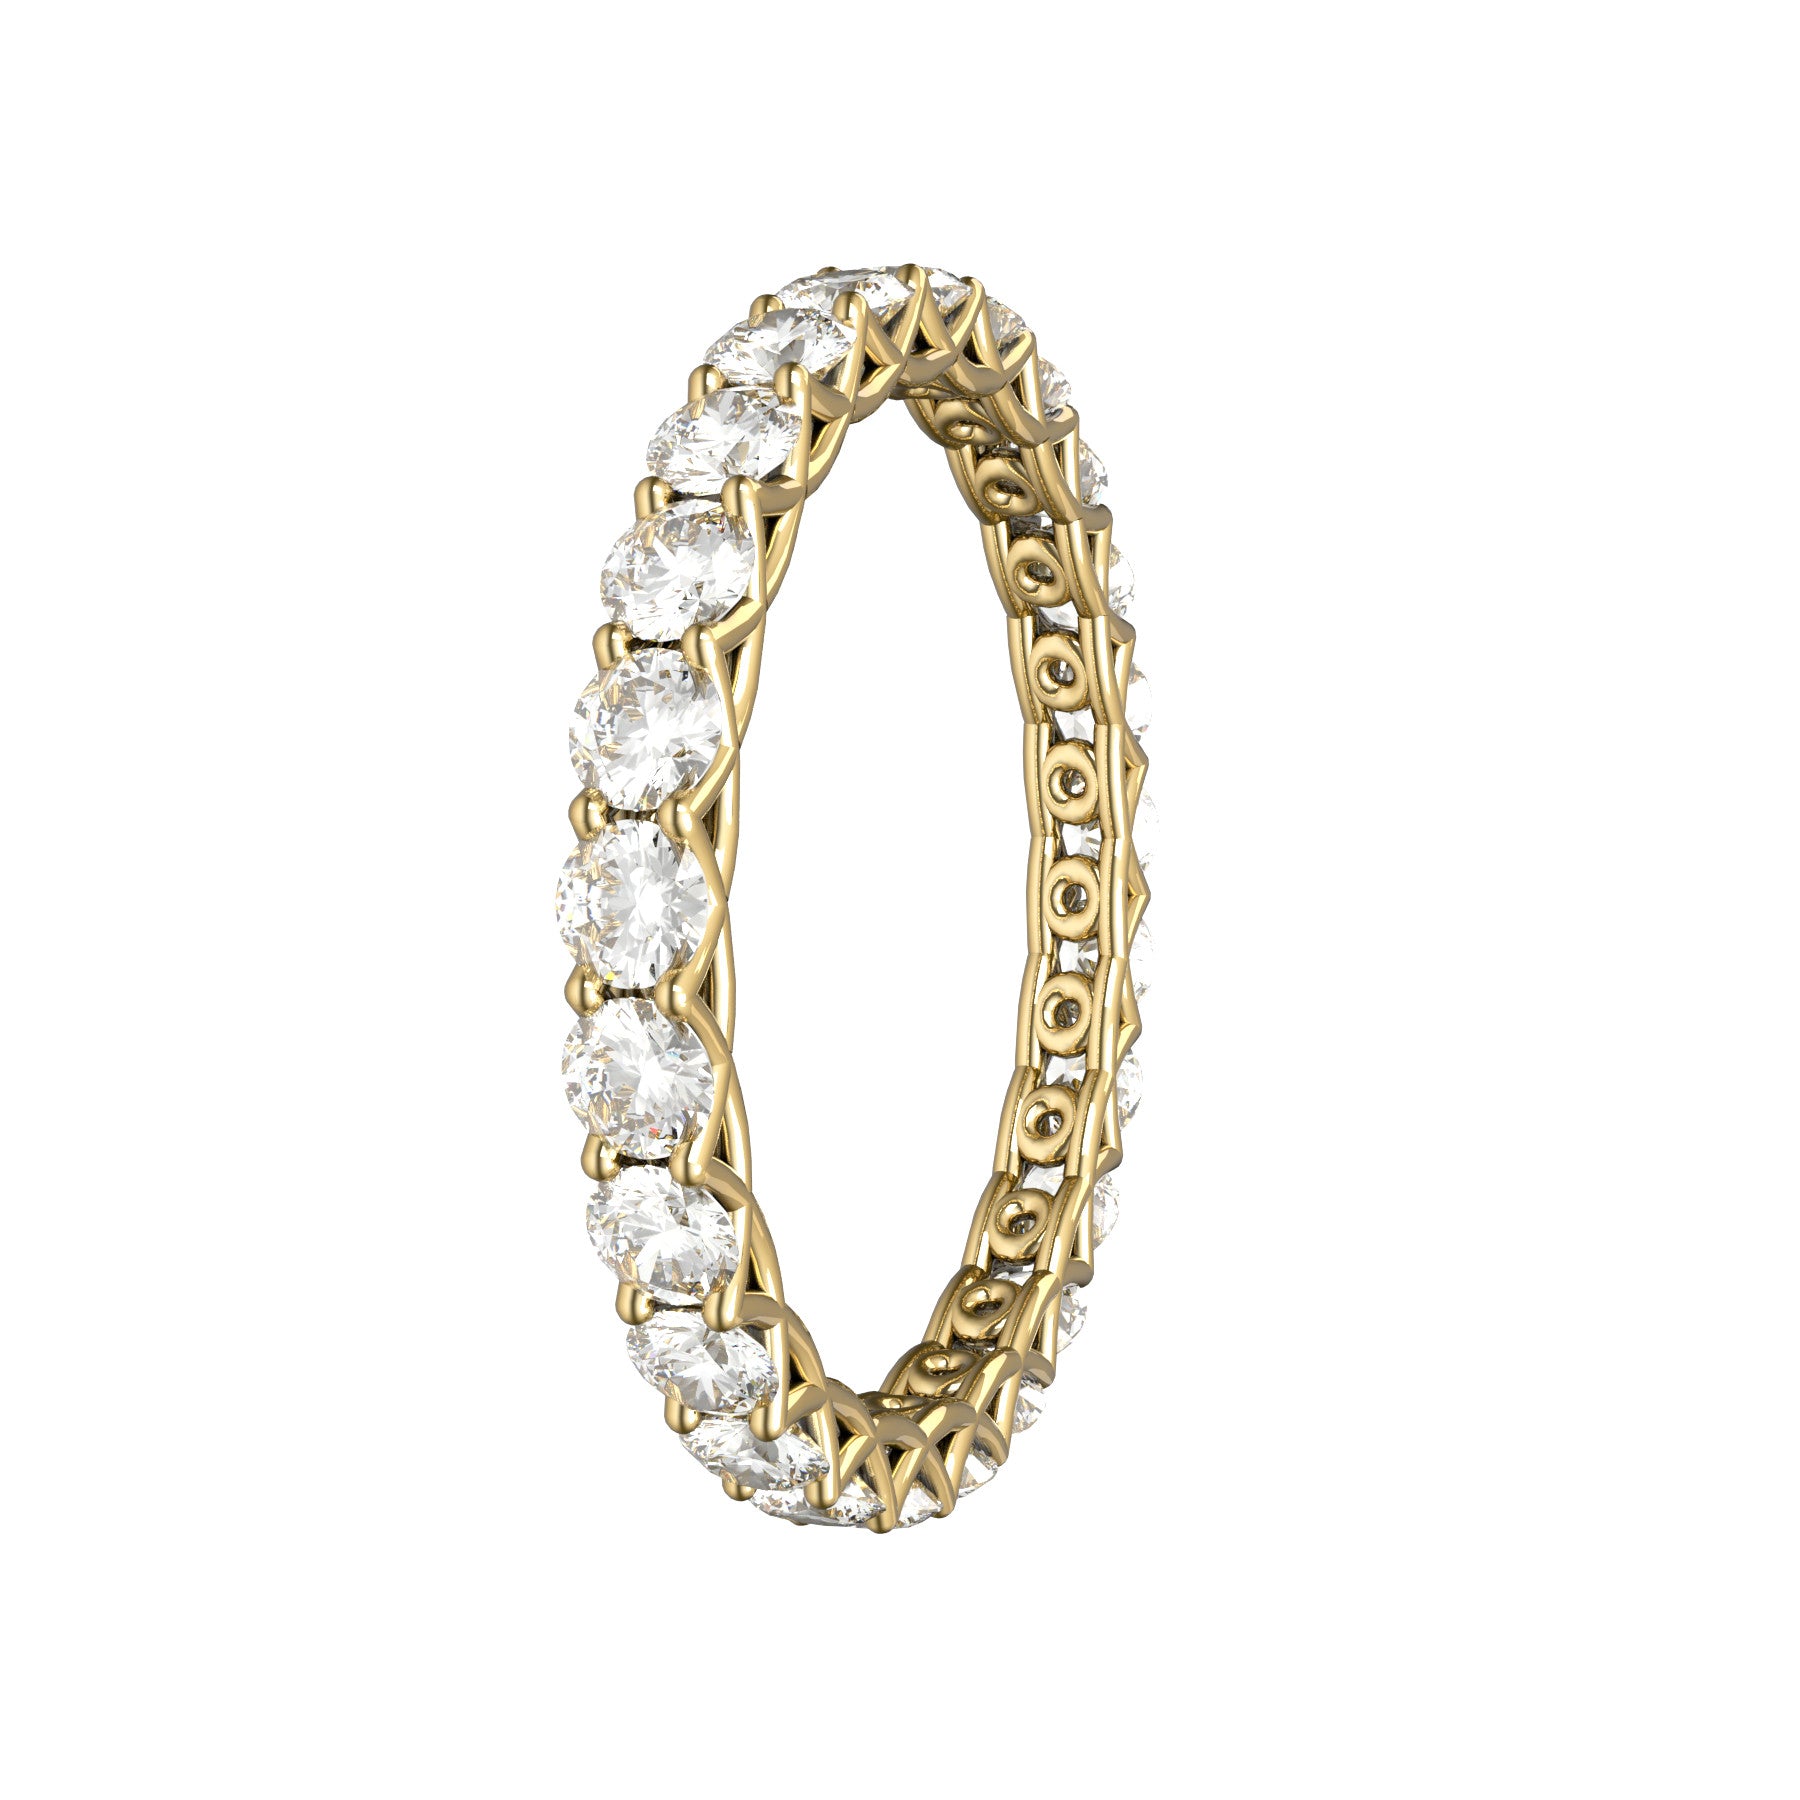 sweet hearts wedding band, 18 K yellow gold, 0,05 natural diamonds, weight about 1,40 g. (0.05 oz), width 2,40 mm